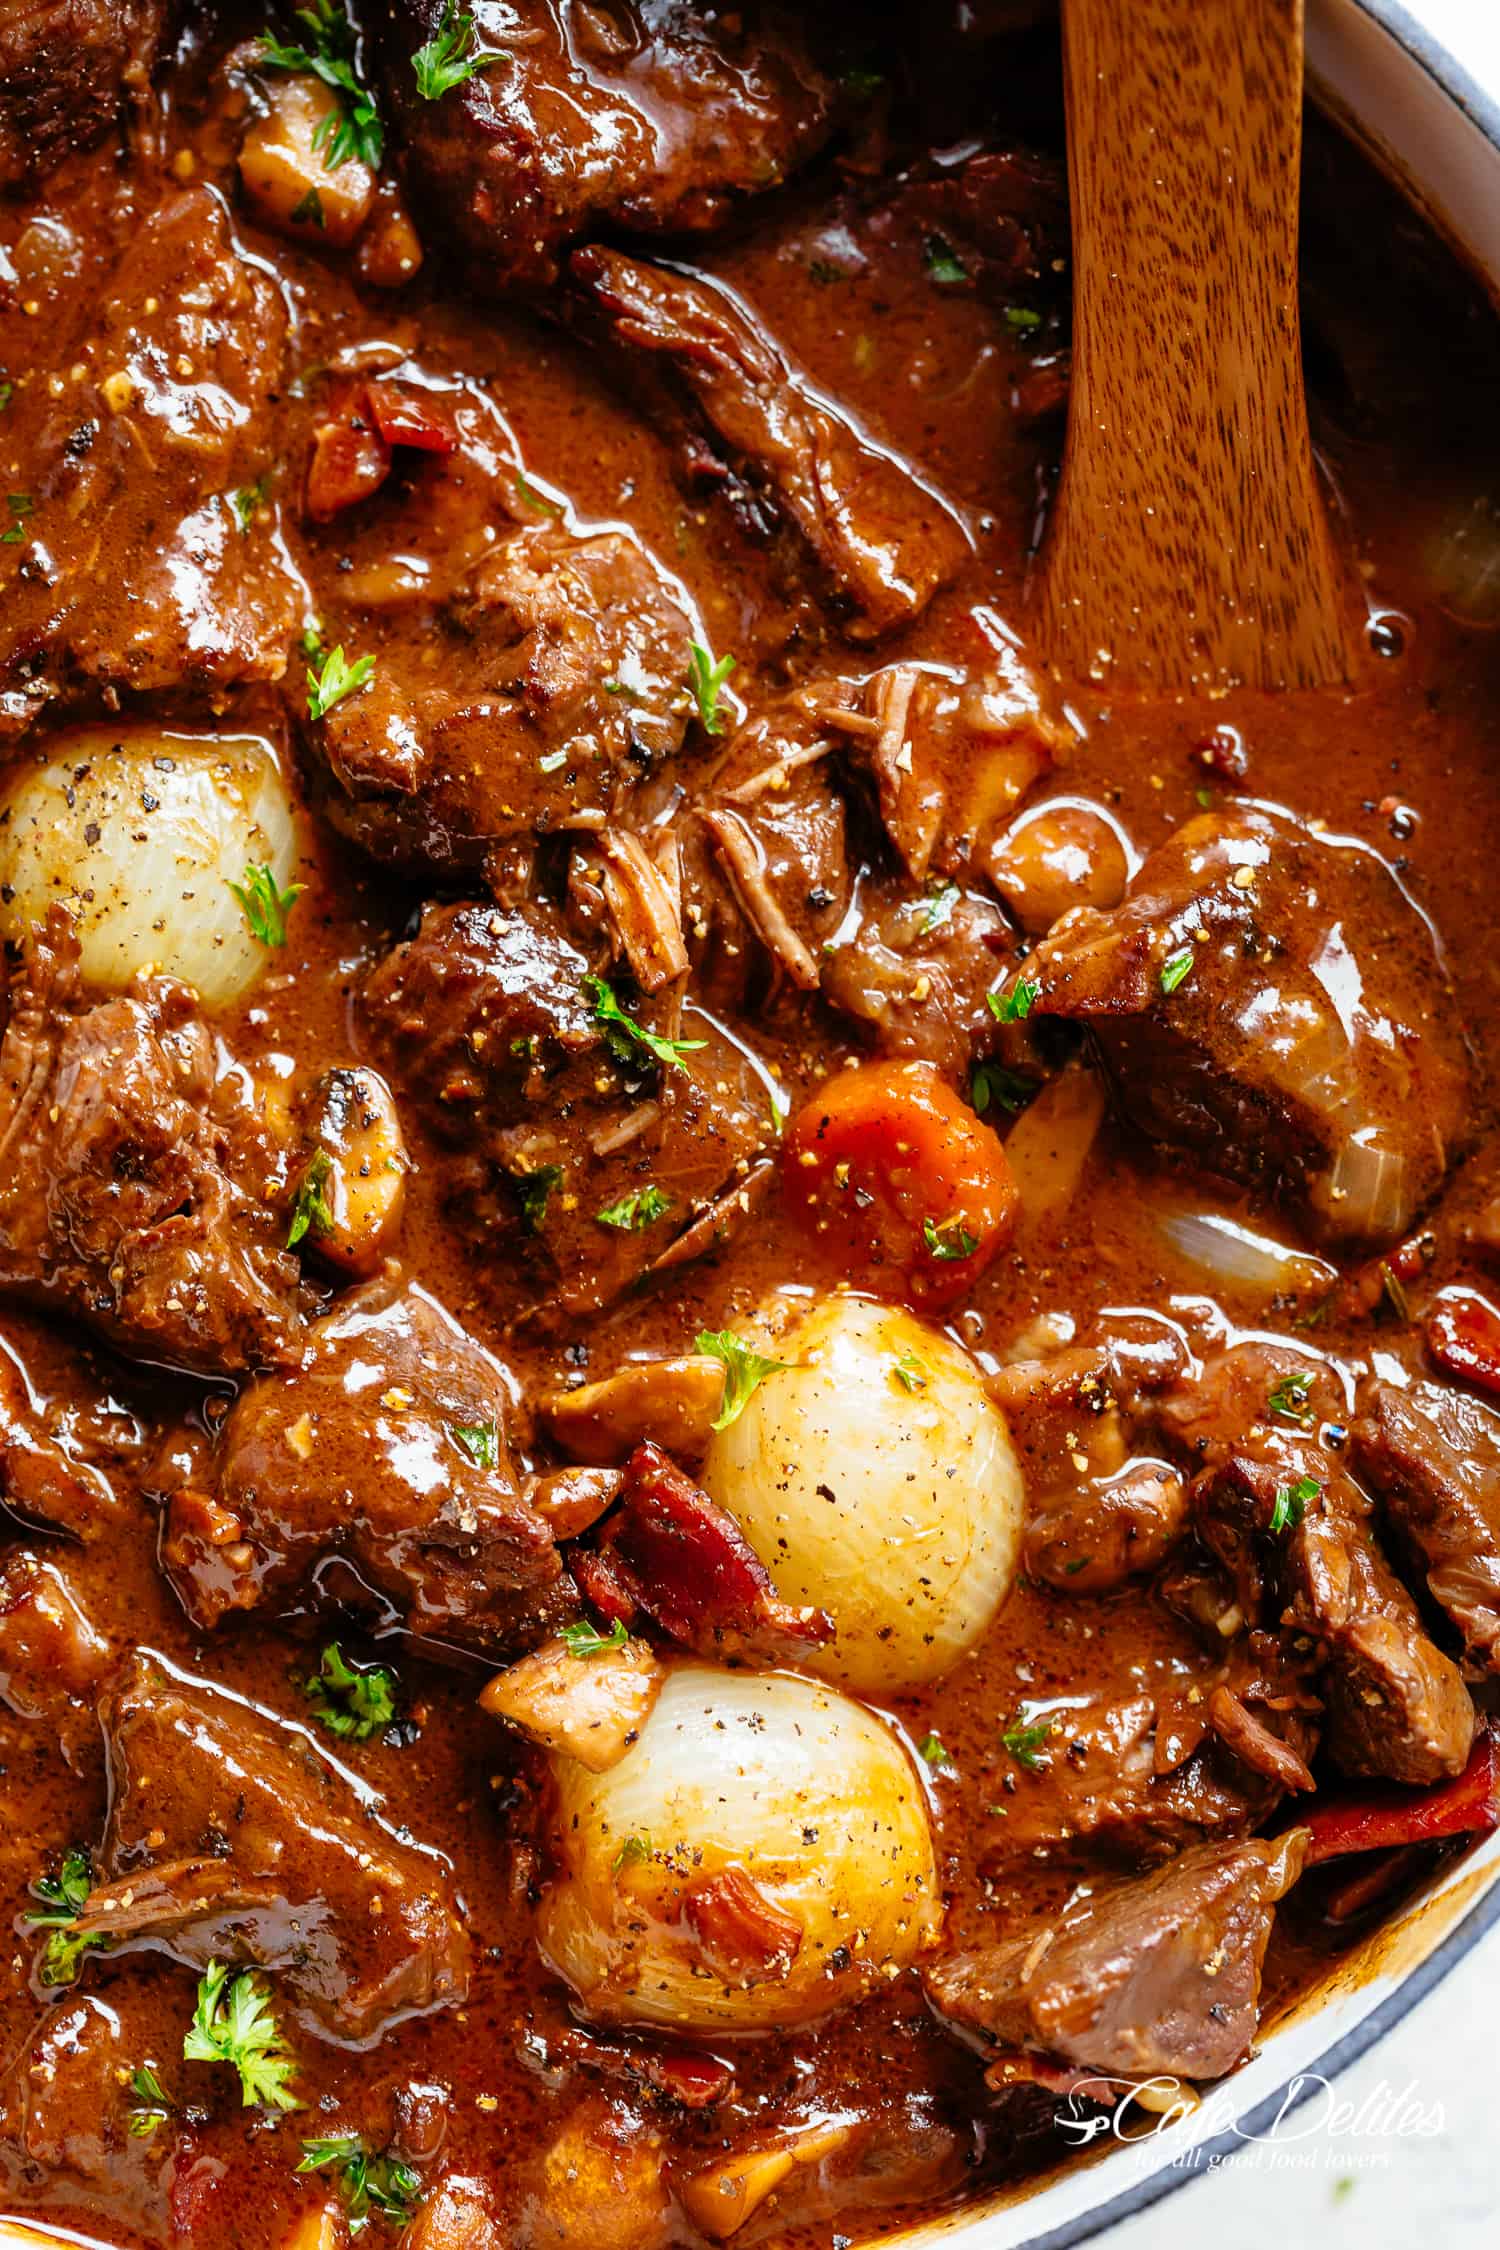 25 Easy Beef Dinners That Are Savory – Easy and Healthy Recipes